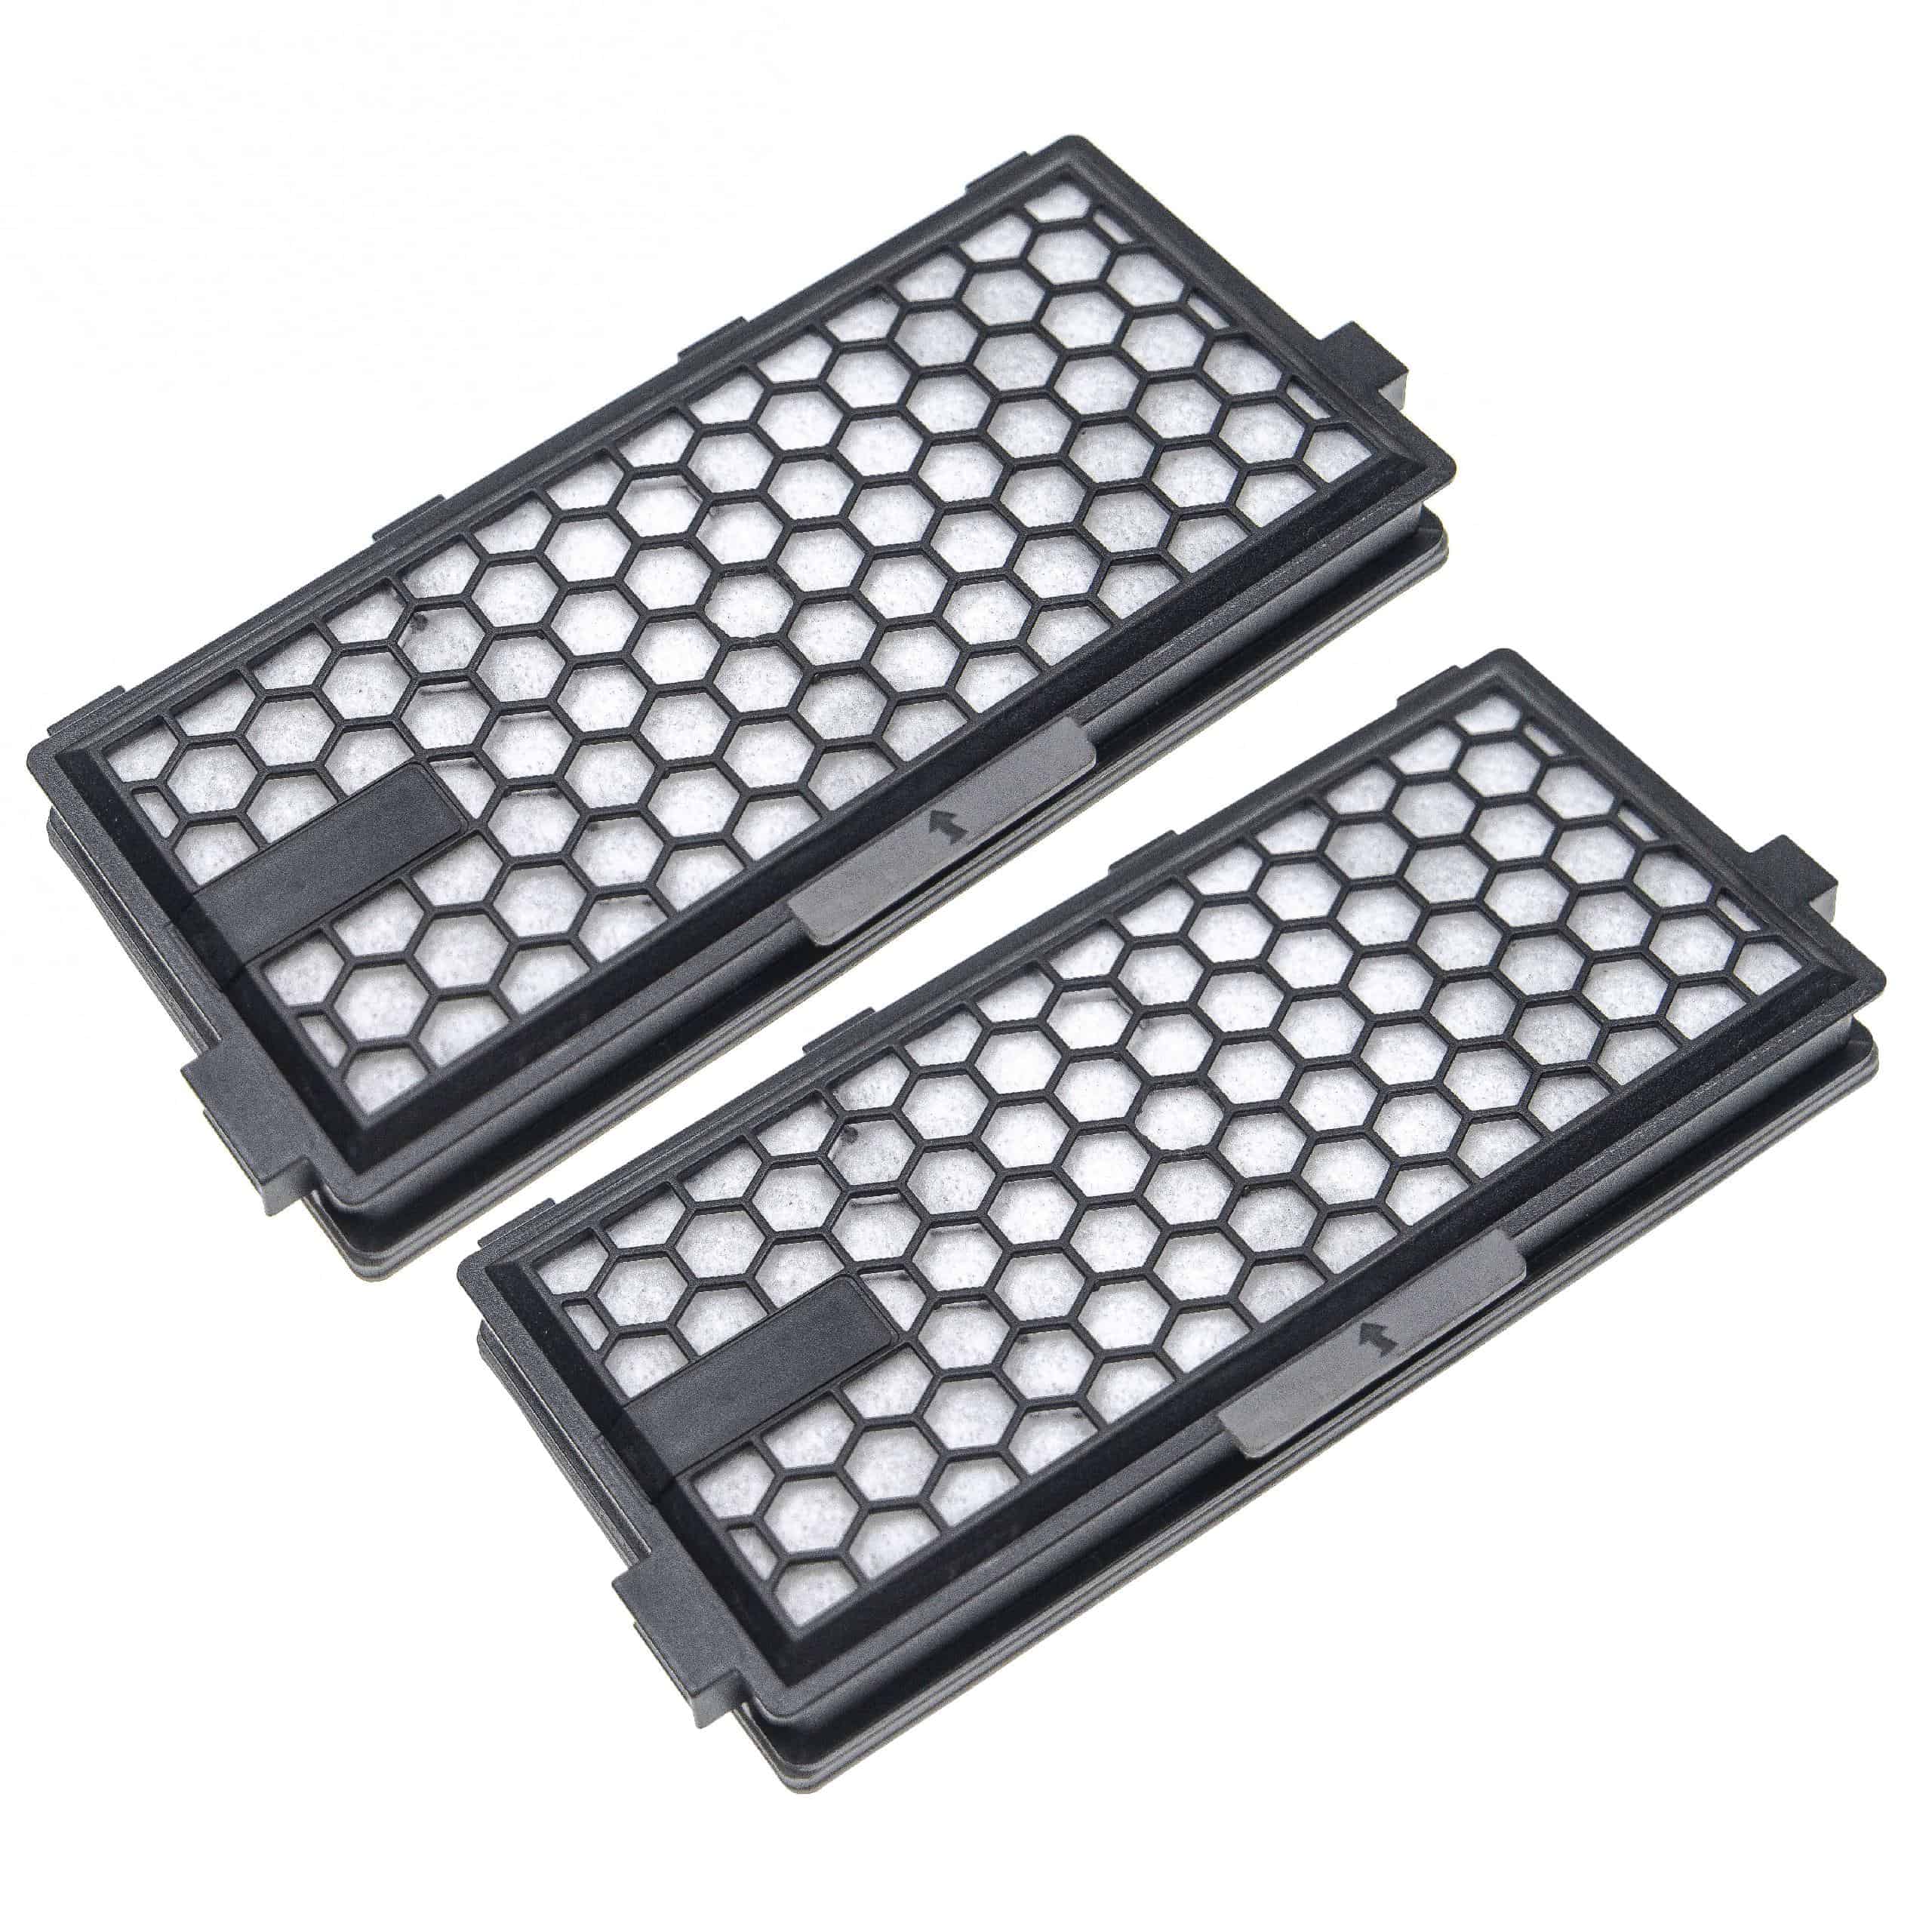 2x HEPA/activated carbon filter replaces Miele 5996882, 5996880, 5996881, 7226150 for Miele Vacuum Cleaner